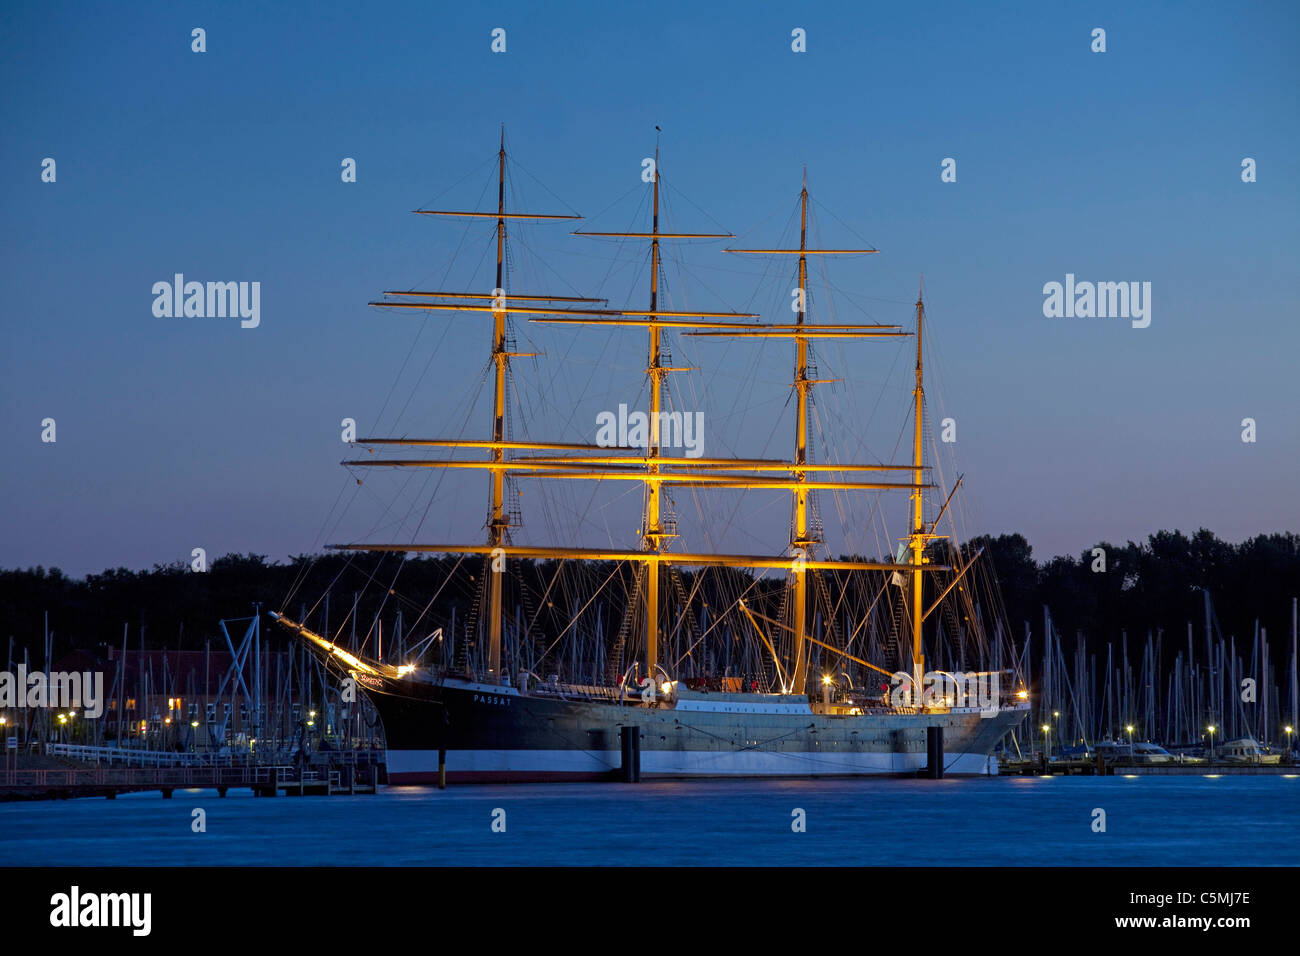 The four-masted steel barque Passat at night. Travemuende, Schleswig-Holstein, Germany. Stock Photo